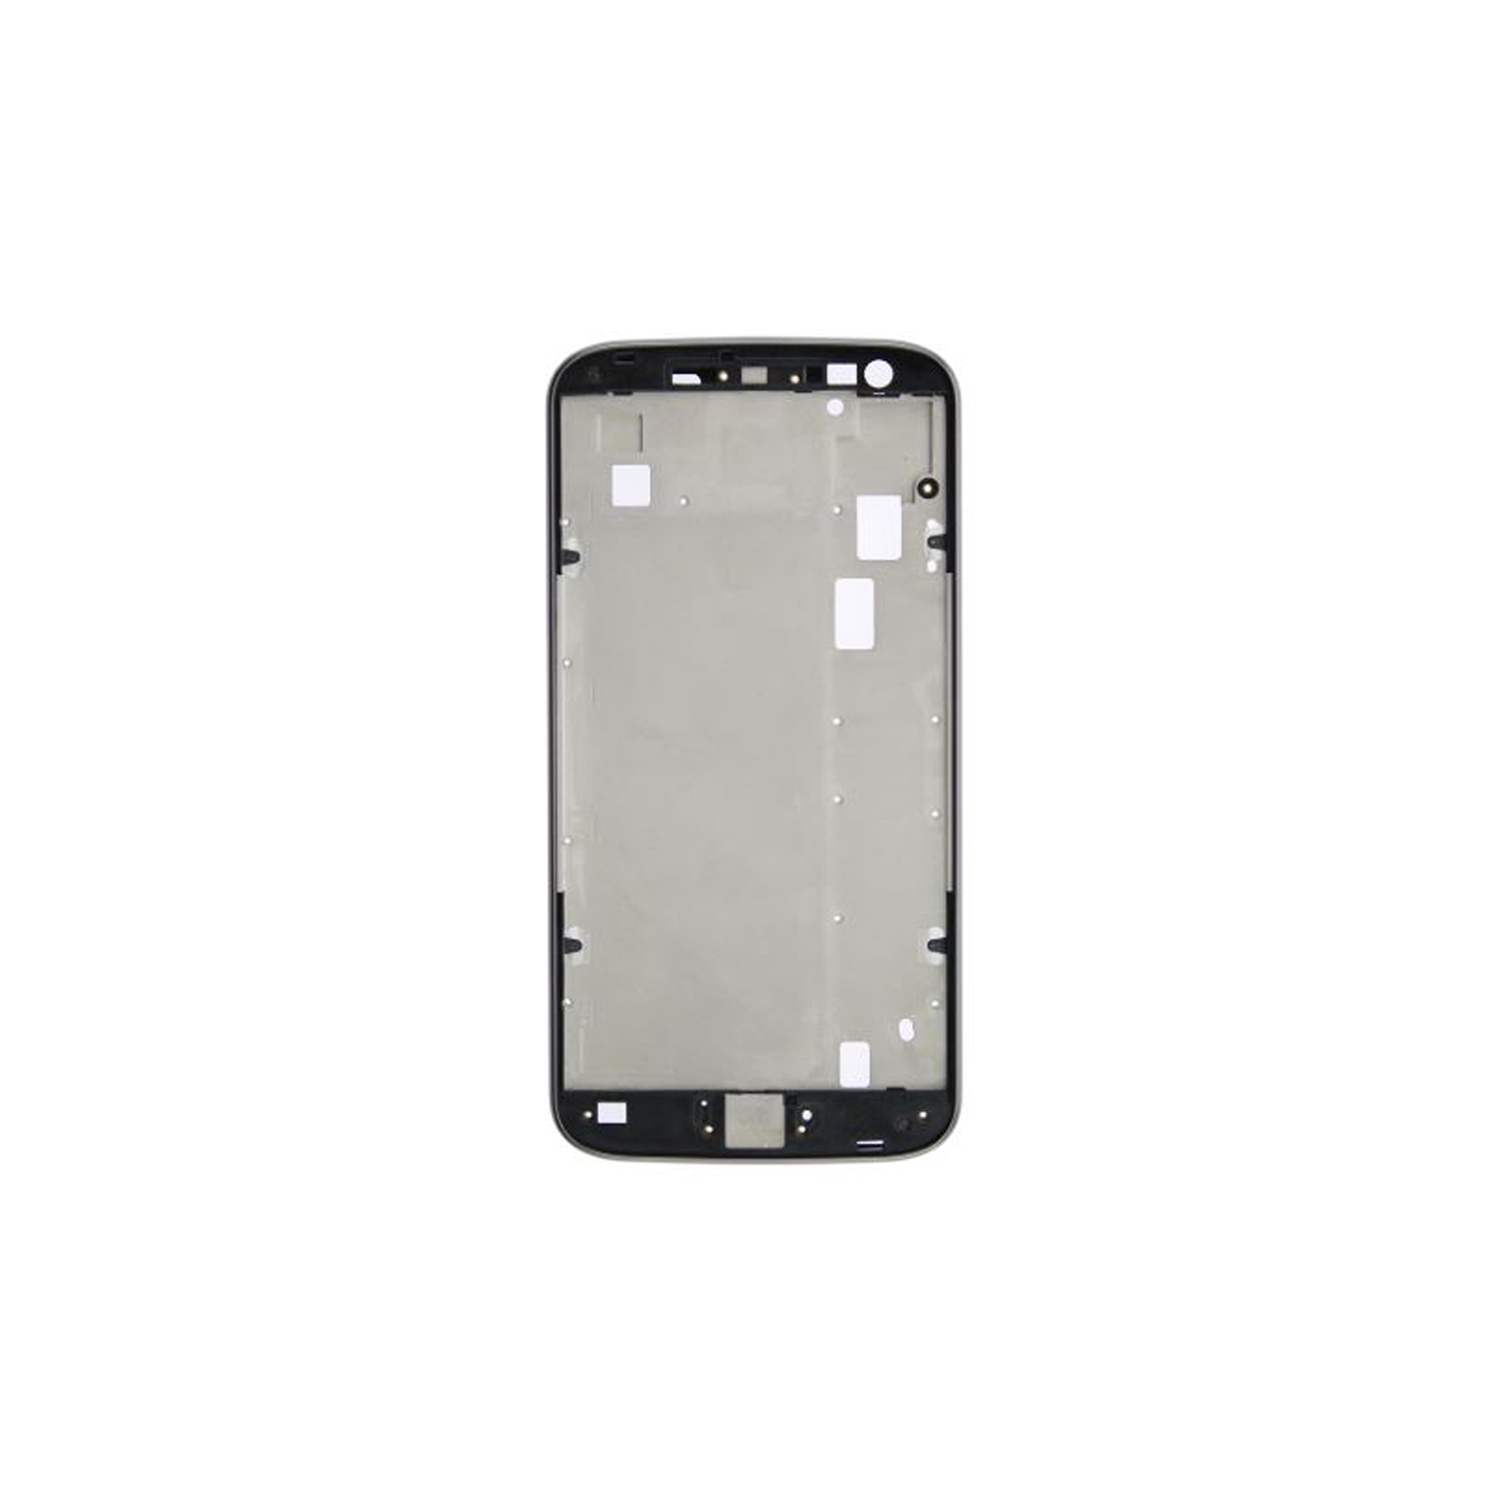 Replacement Front LCD Frame Bezel Plate Compatible With Motorola Moto G4 Plus - Black